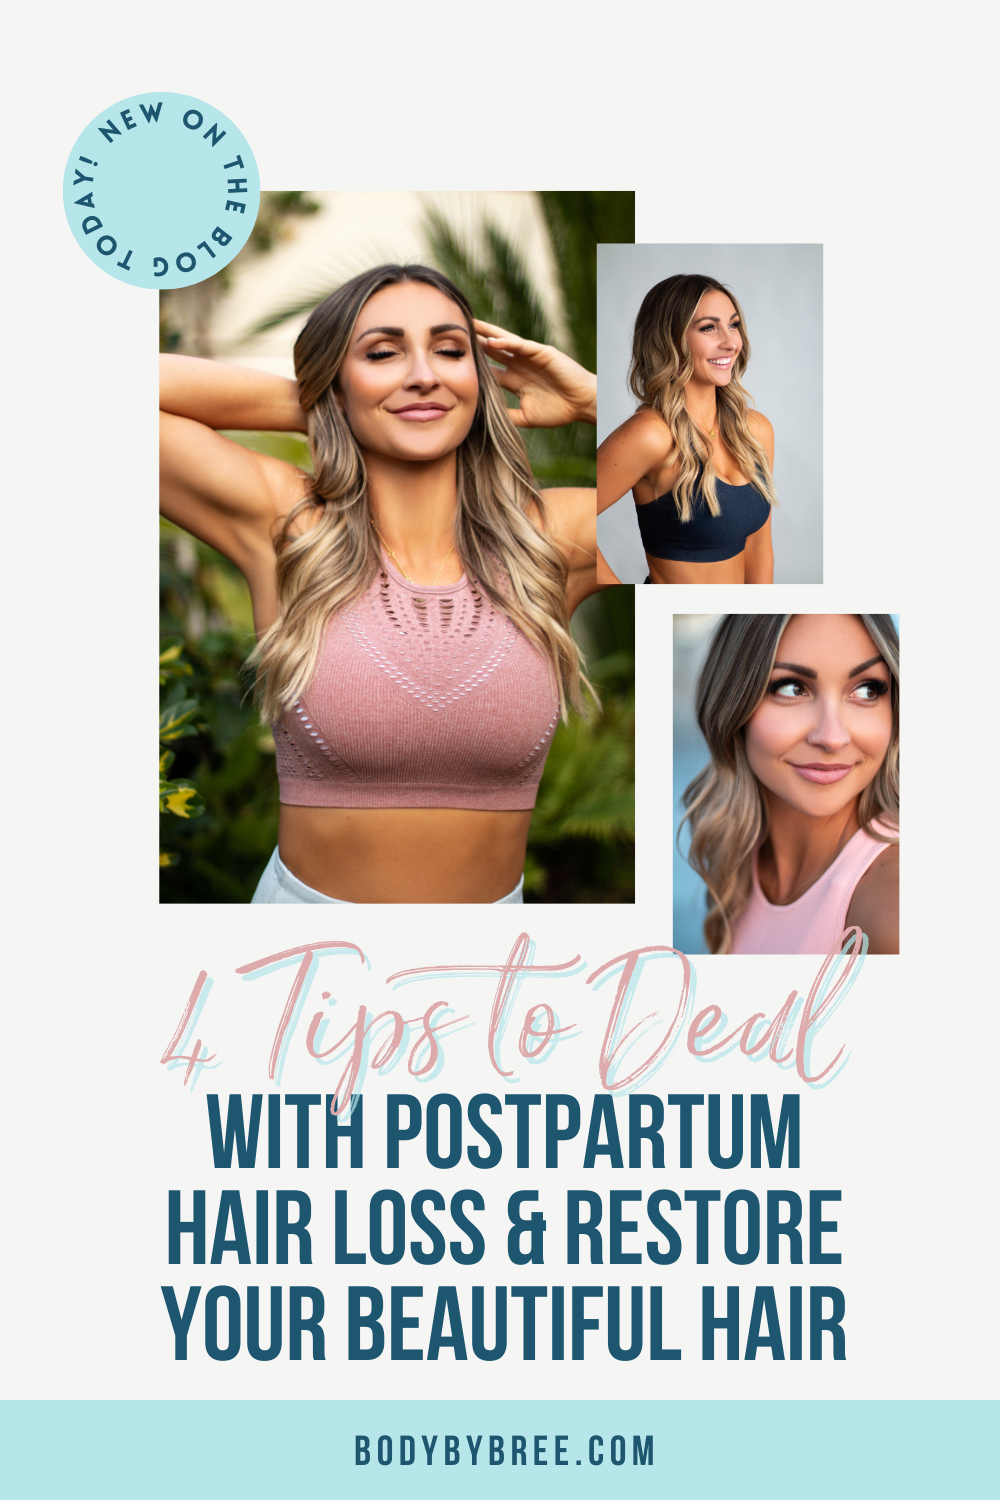 4 TIPS TO DEAL WITH POSTPARTUM HAIR LOSS AND RESTORE YOUR BEAUTIFUL HAIR